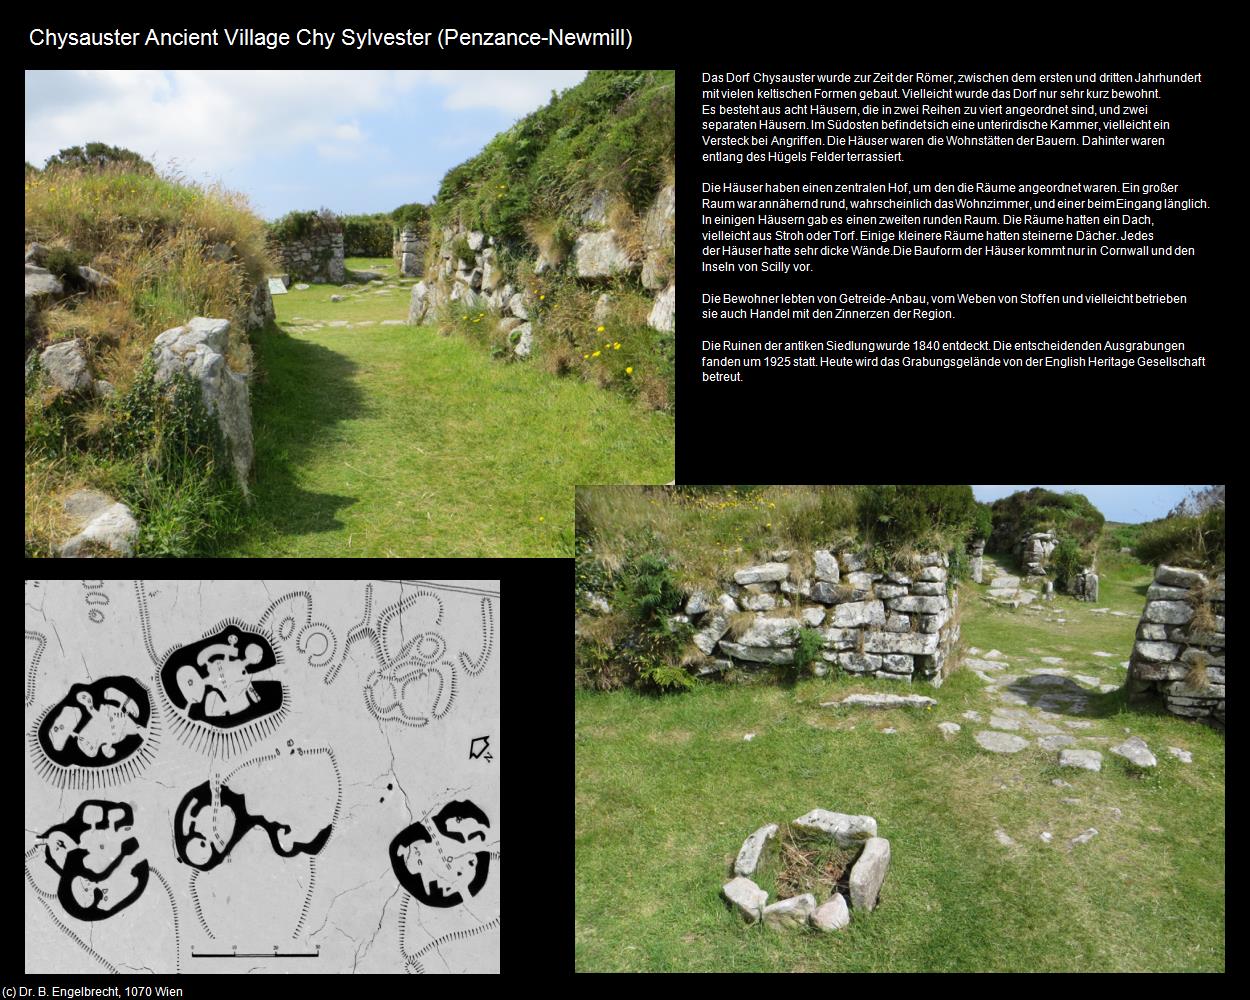 Chysauster Ancient Village (Newmill) (Penzance, England) in Kulturatlas-ENGLAND und WALES